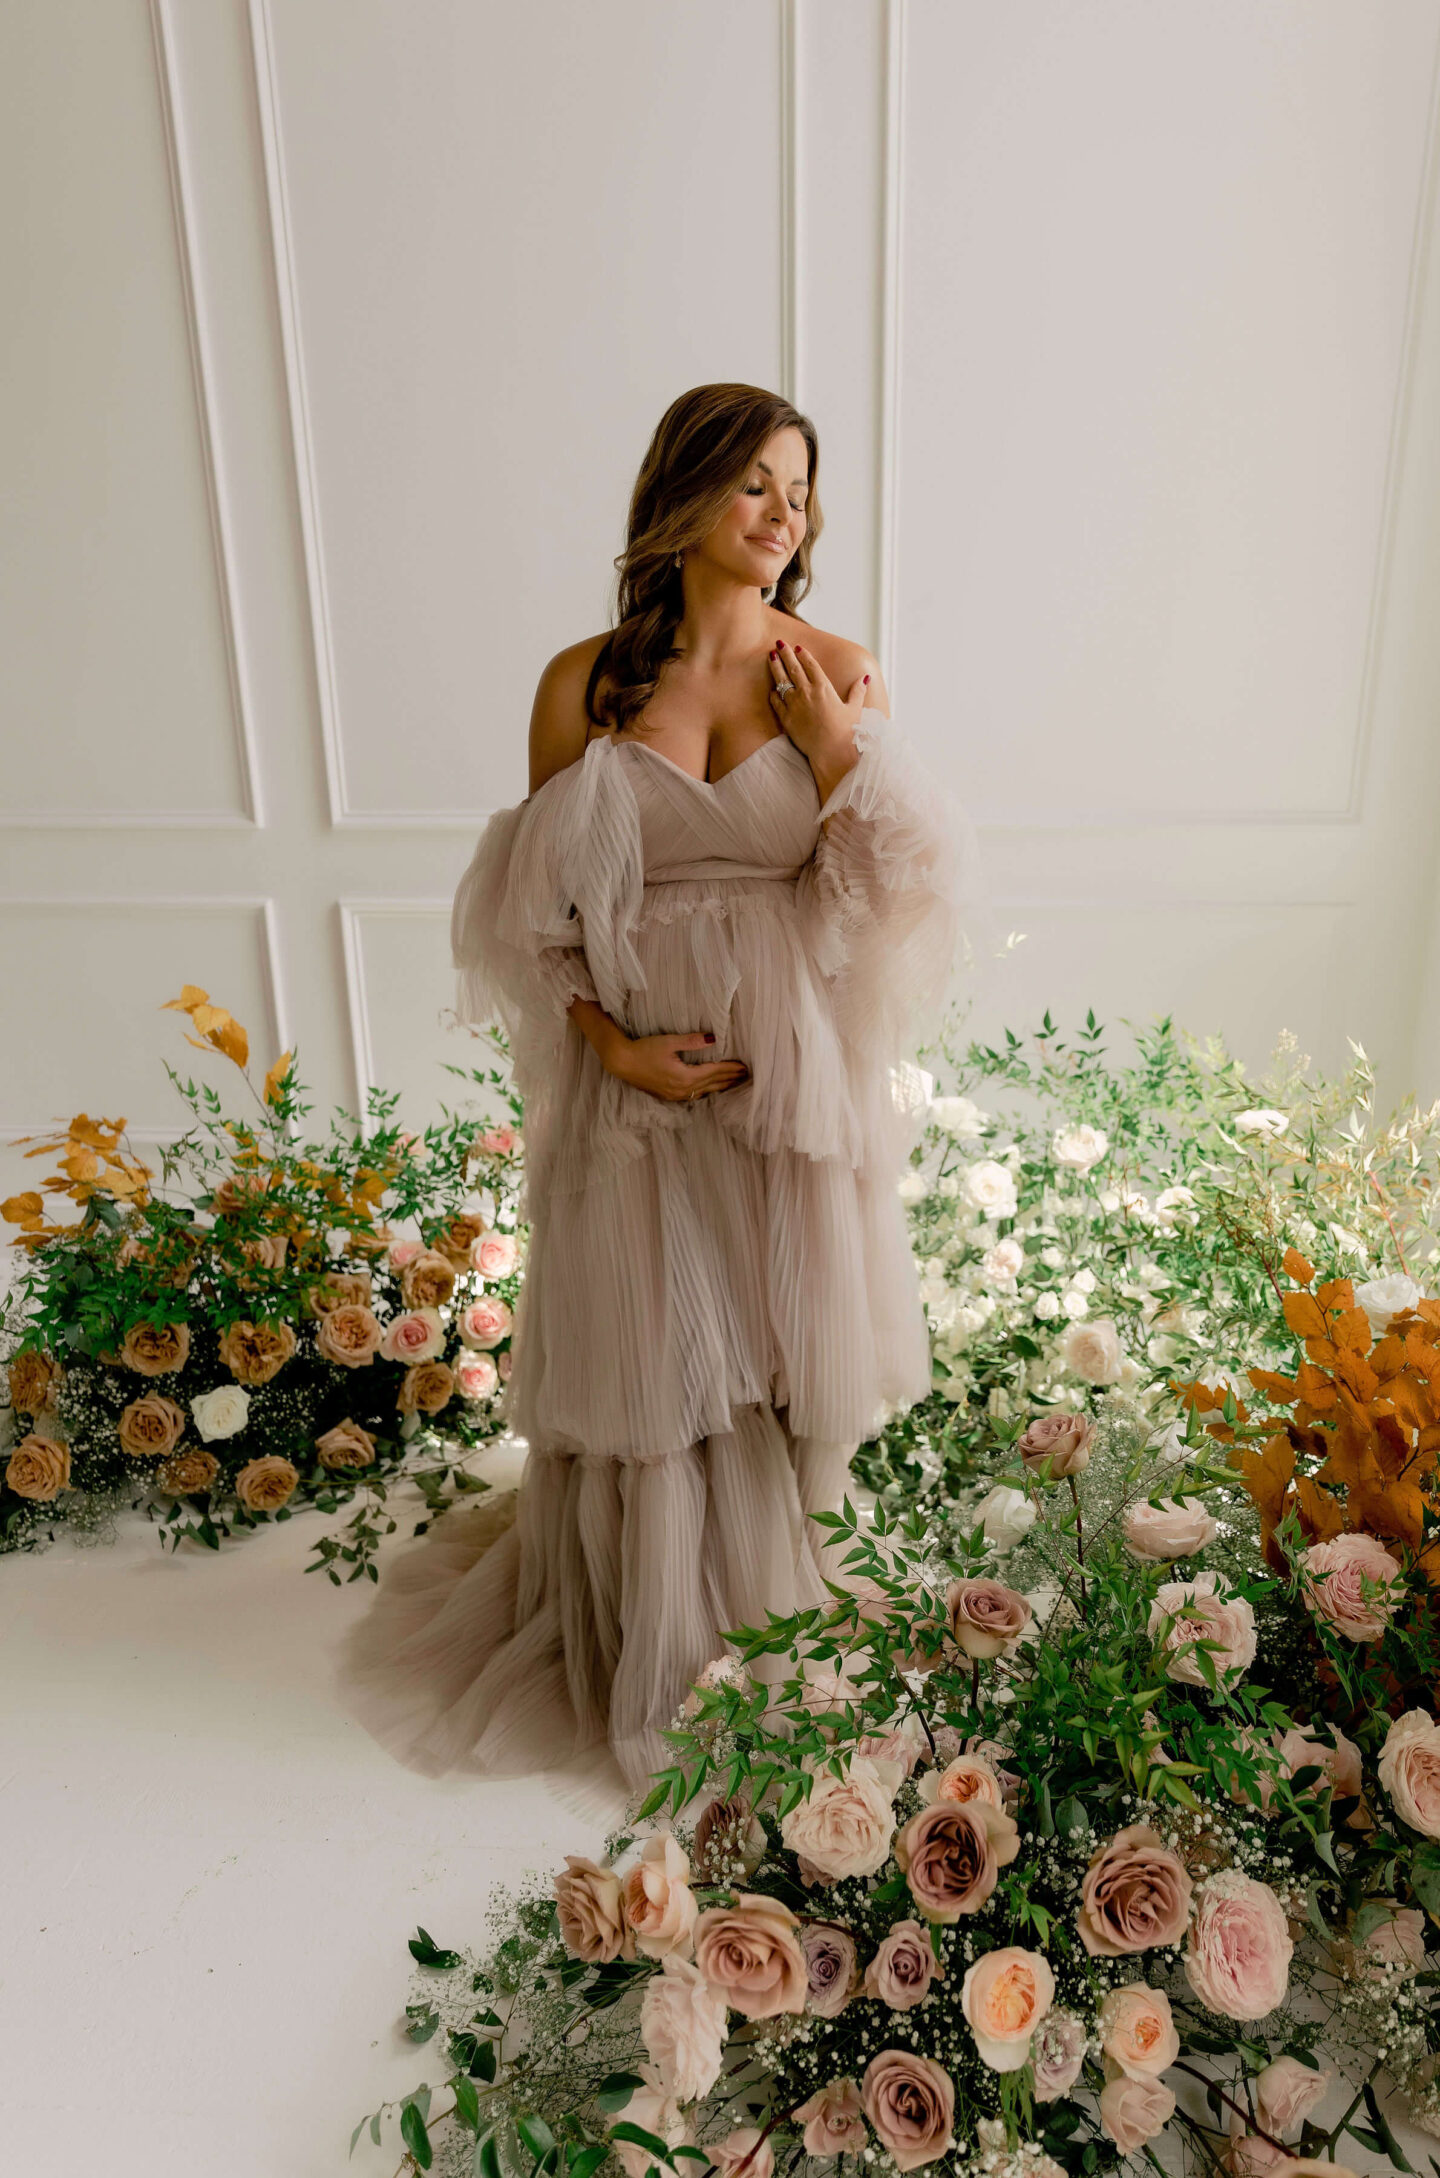 pregnant woman standing with flowers around her at maternity photoshoot